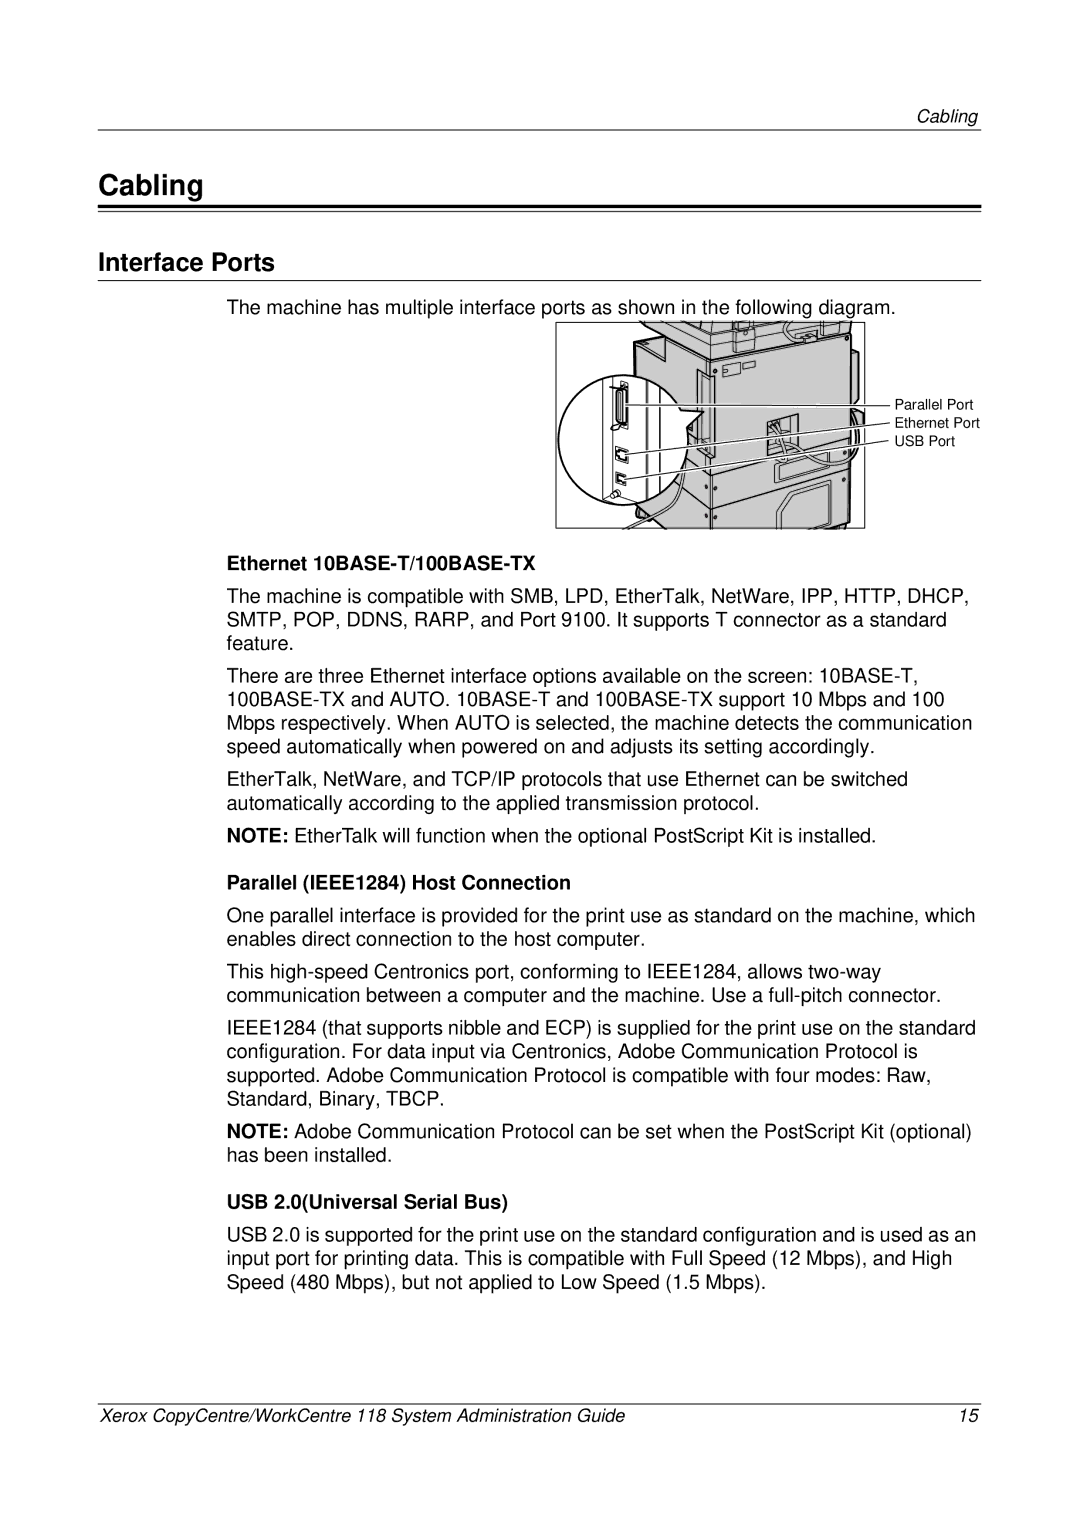 Xerox 701P42722_EN manual Cabling, Interface Ports, Ethernet 10BASE-T/100BASE-TX, Parallel IEEE1284 Host Connection 